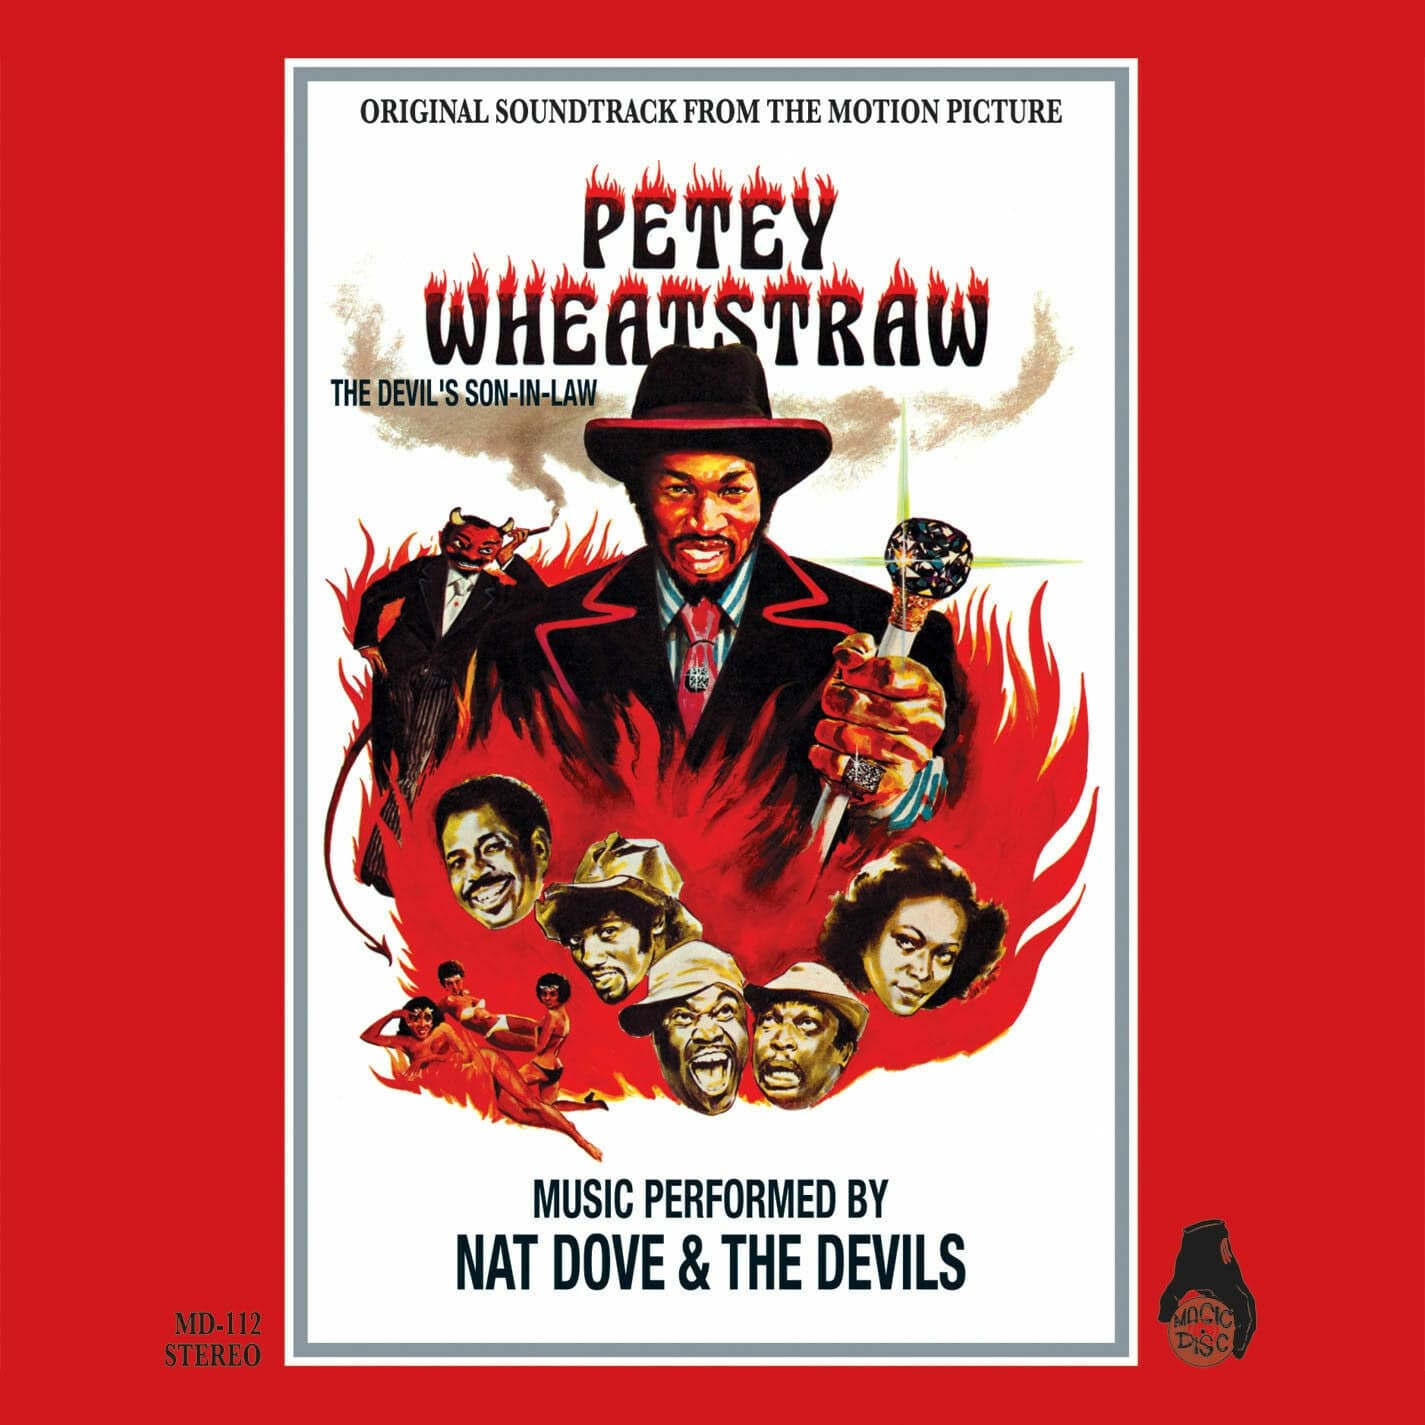 PETEY WHEATSTRAW - The Devil's Son-In-Law: The Motion Picture Soundtrack LP (Rudy Ray Moore) *BENT CORNER*